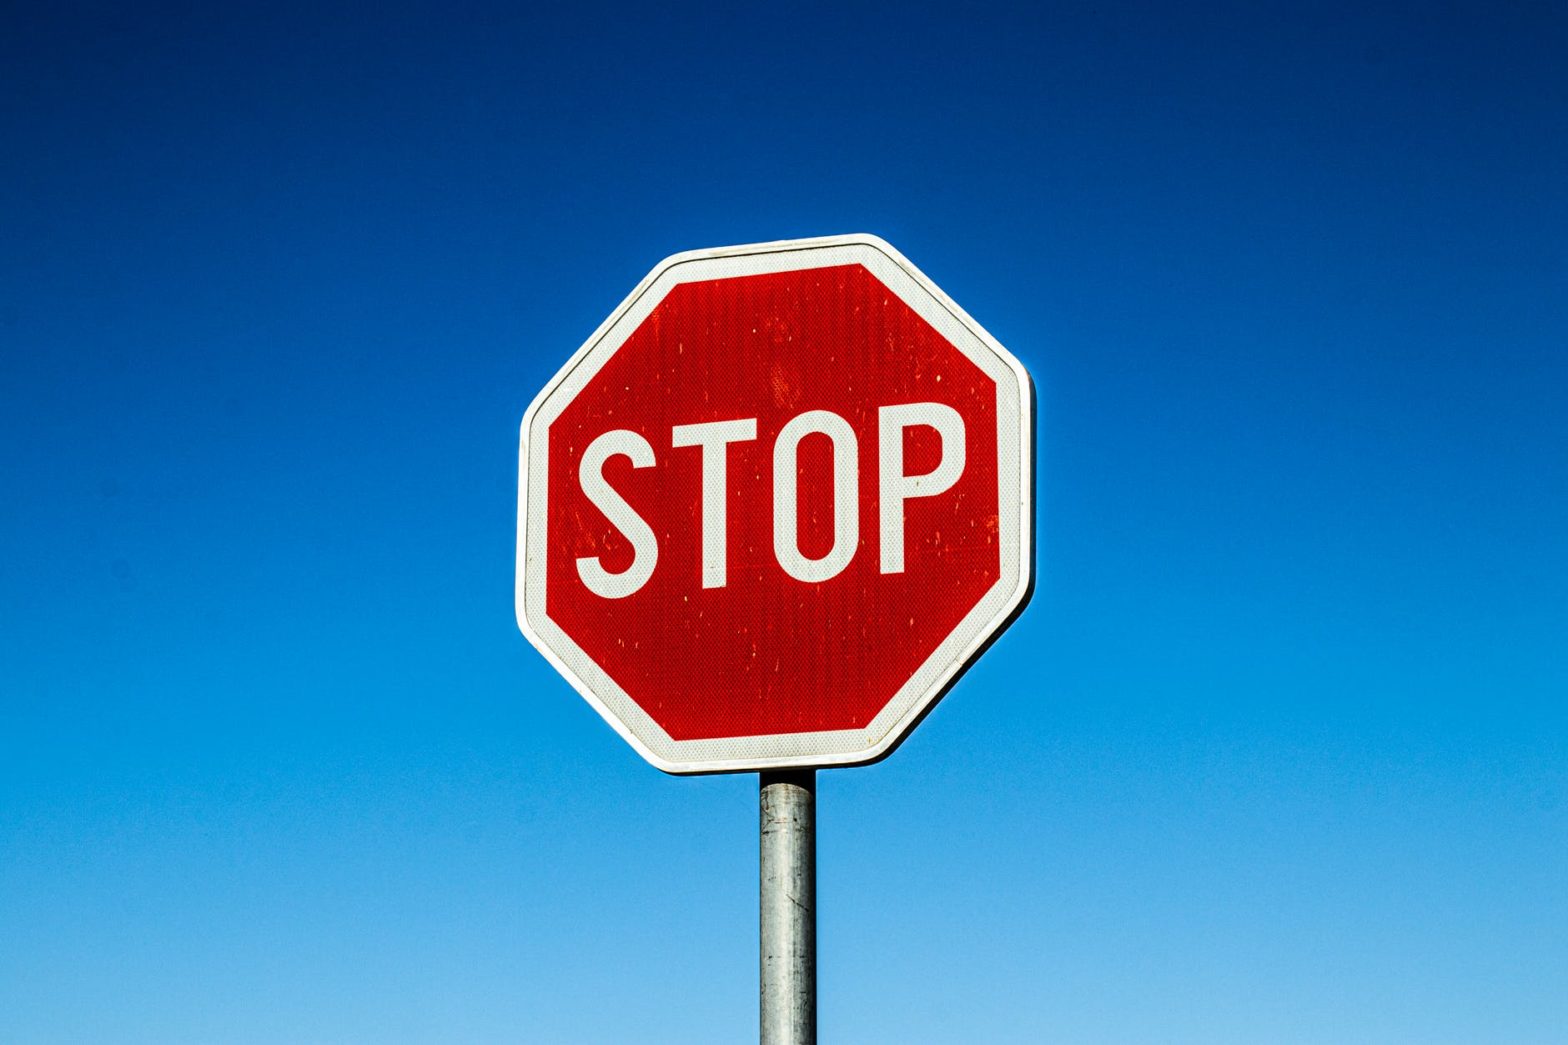 We Must Put an End to Government Overreach, Which is Why I’m Burning Down These Stop Signs